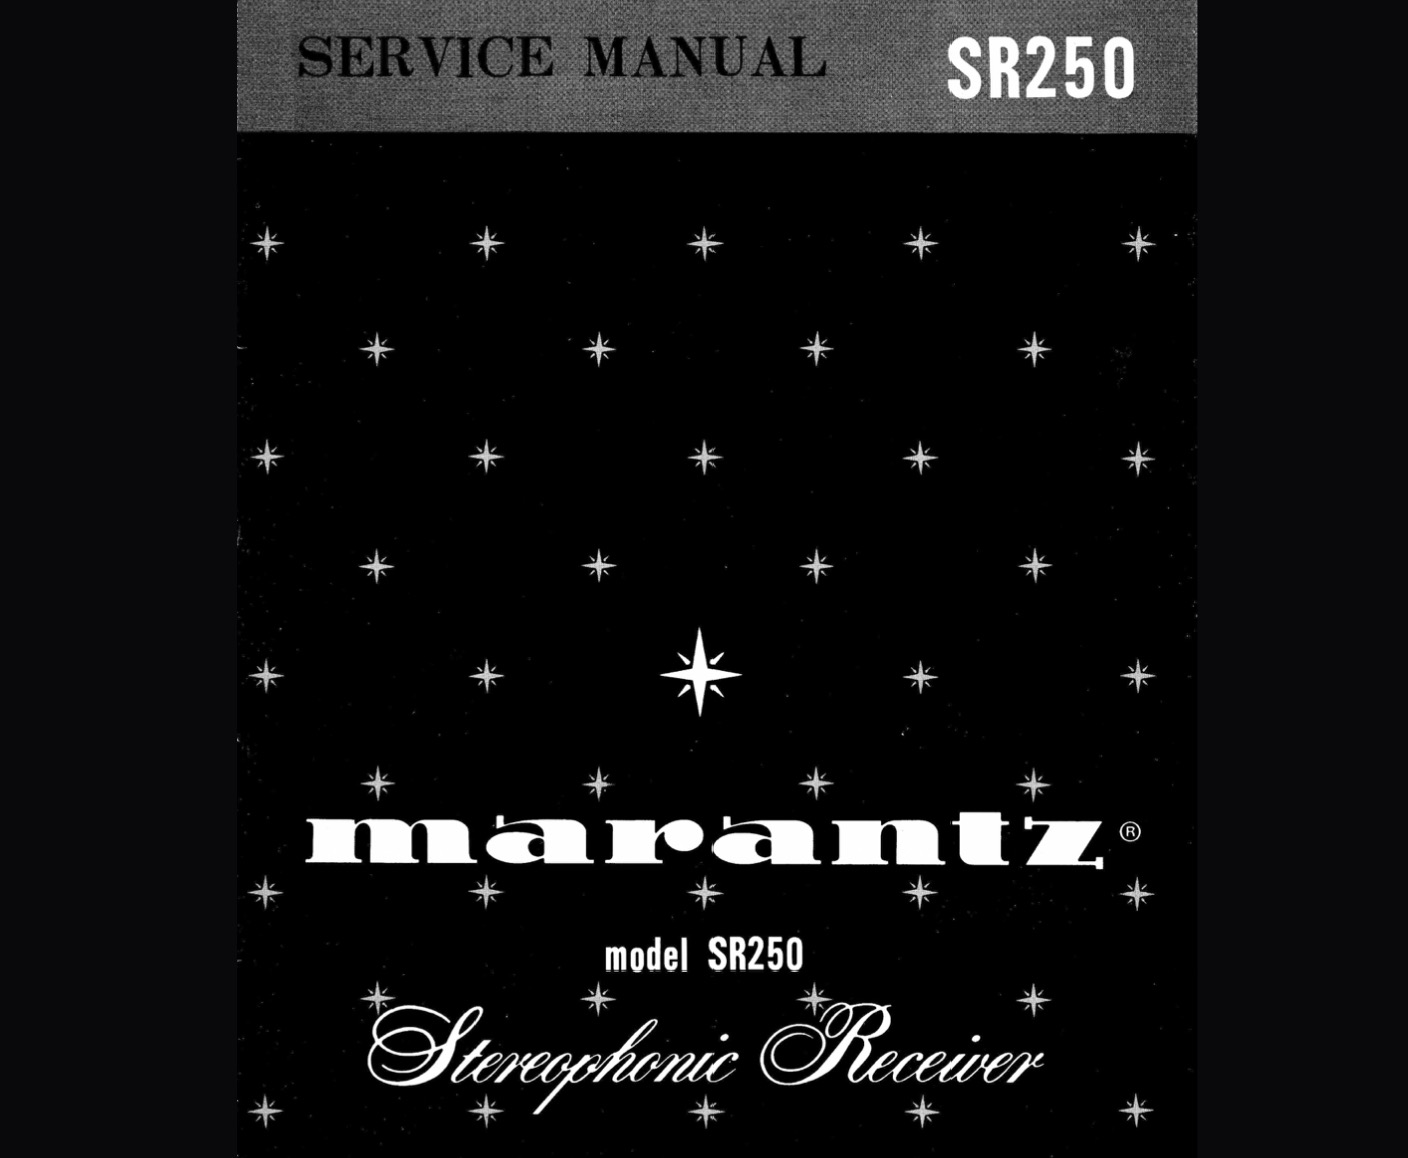 Marantz SR250 Stereophonic Receiver Service Manual, Parts List, Exploded View, Wiring and Schematic Diagram